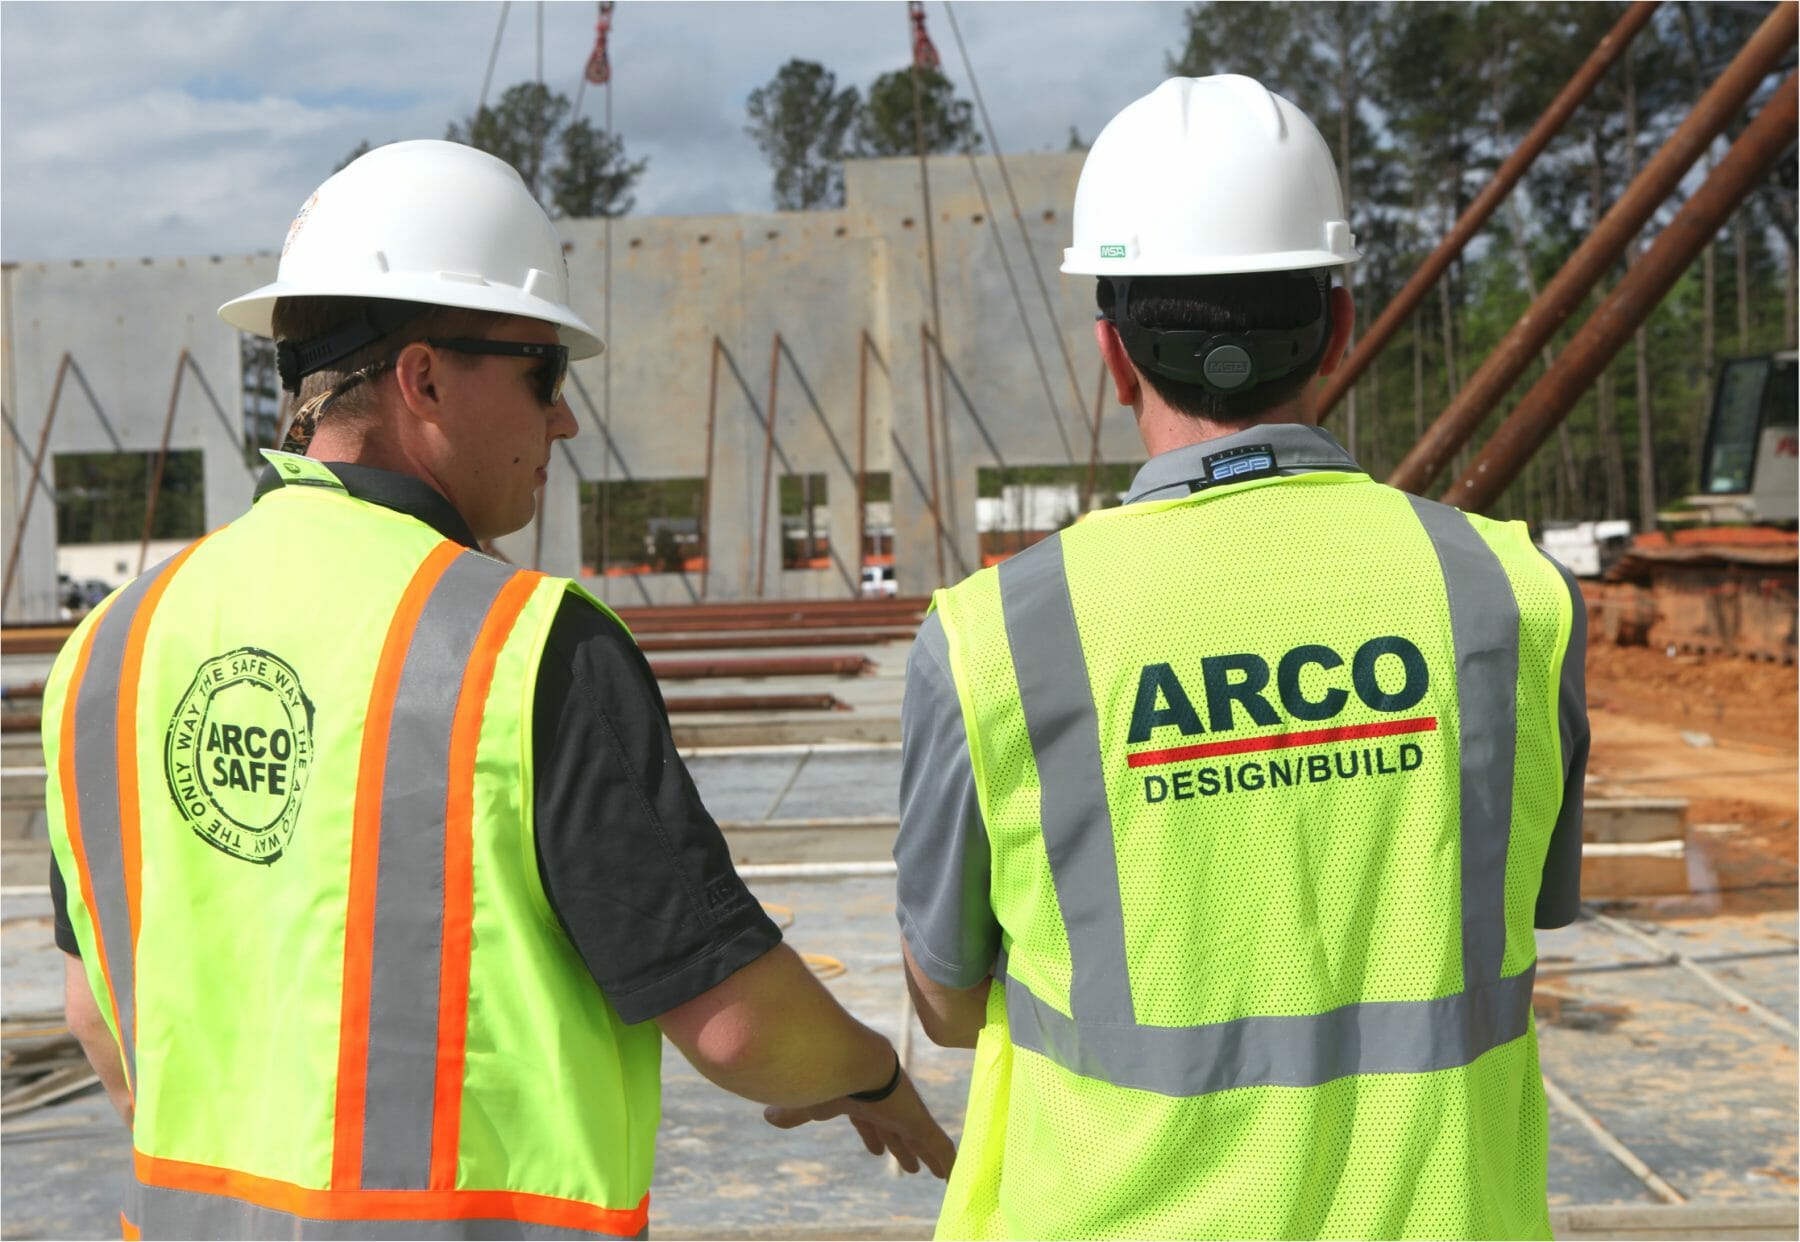 ARCO Design/Build construction photo - workers wearing safety vests and hard hats.